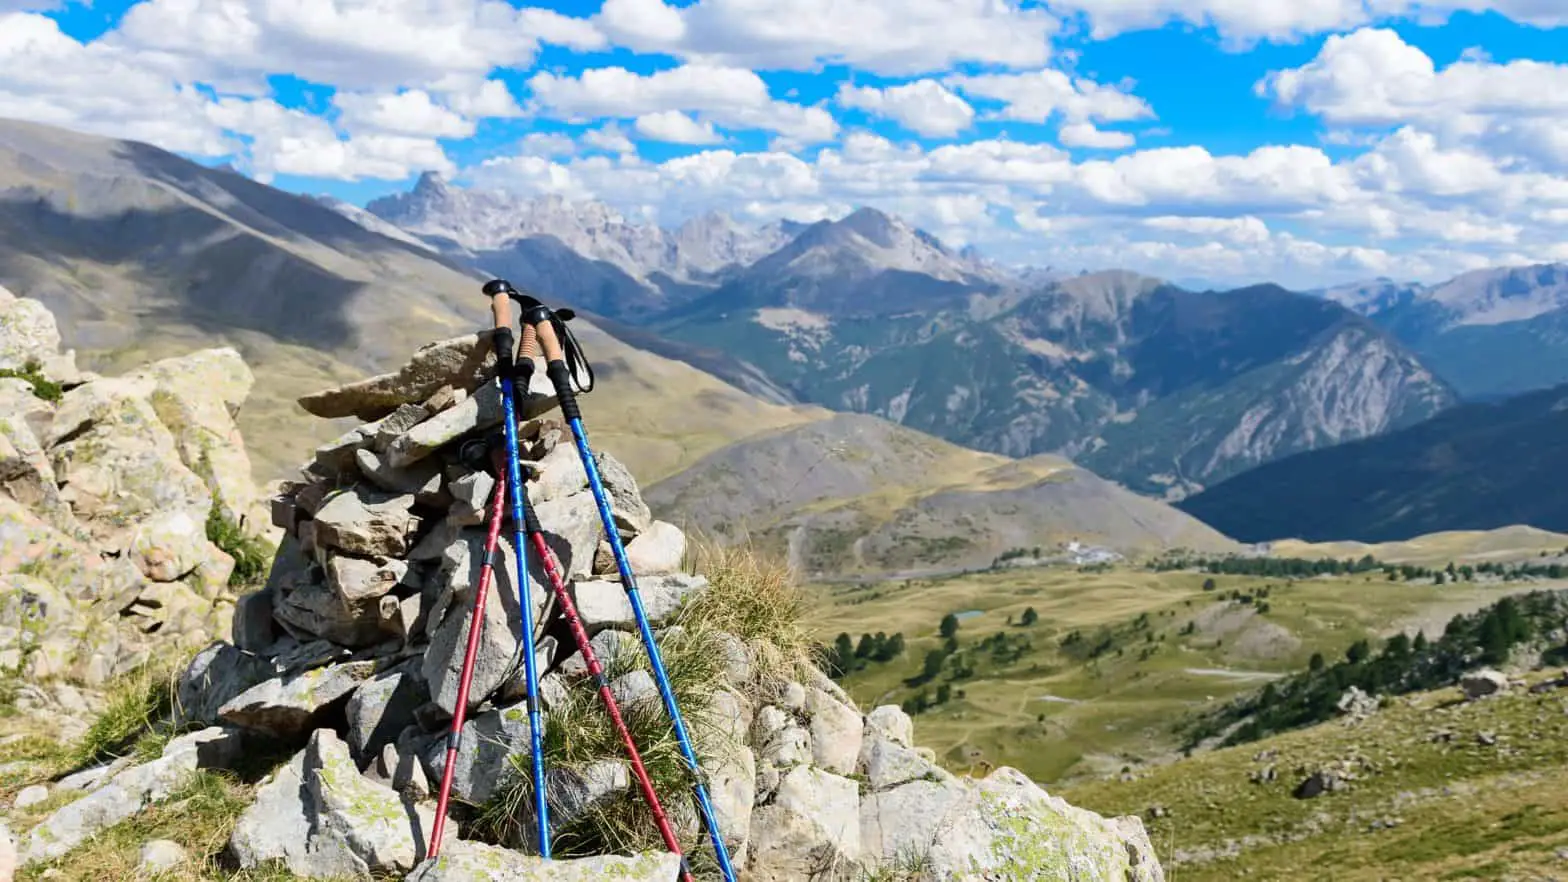 The best hiking poles is placed beside the mountain rocks